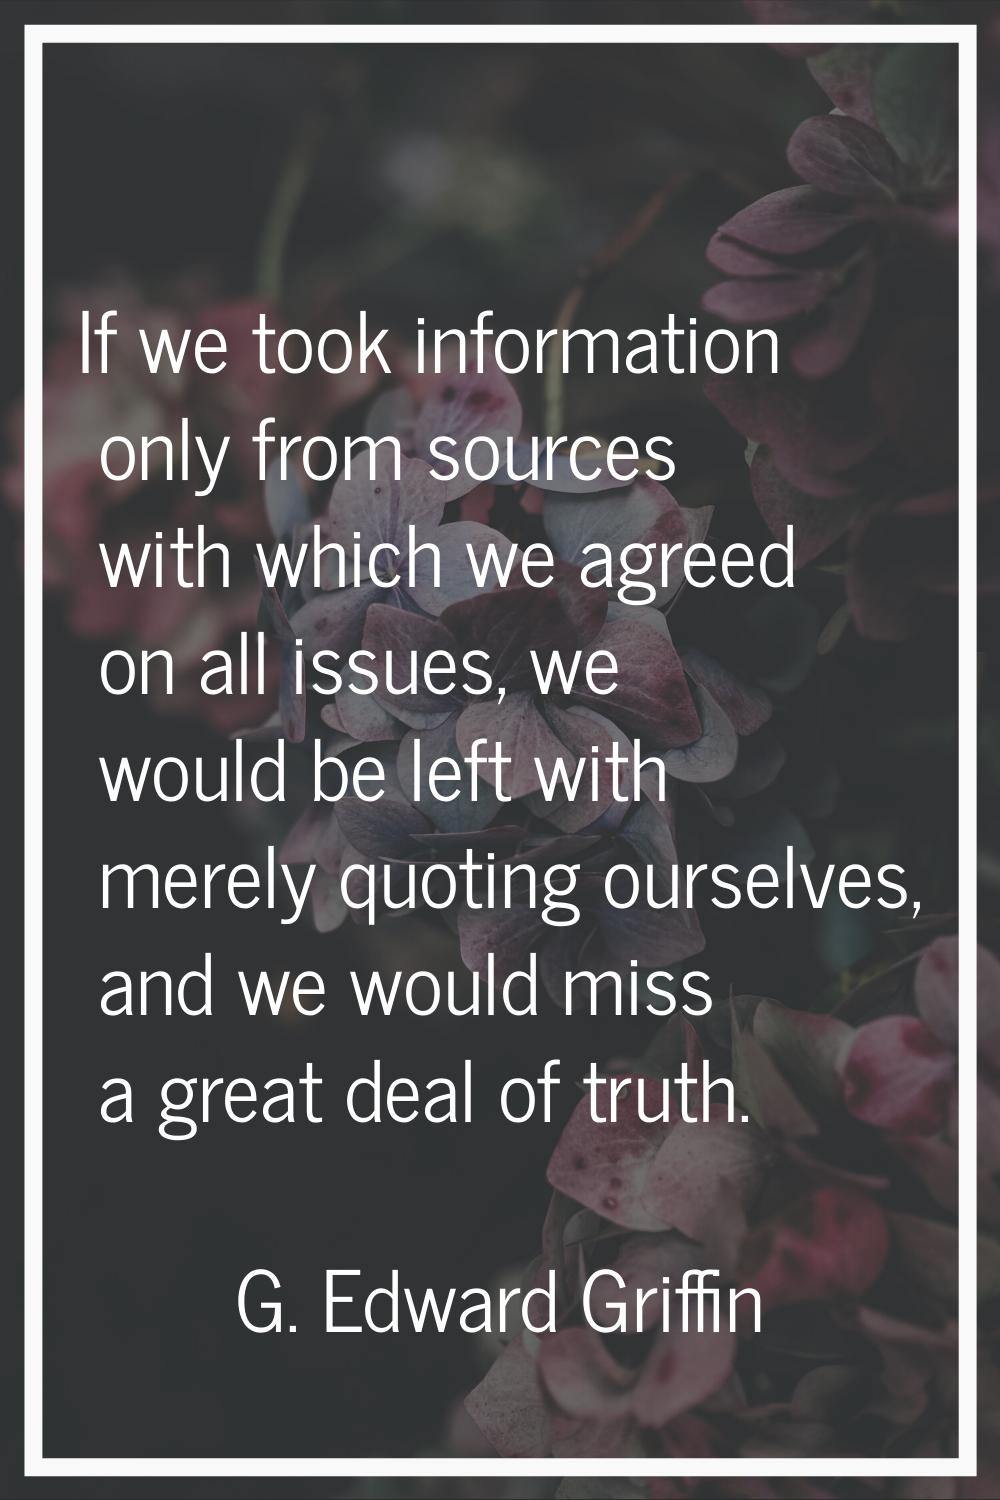 If we took information only from sources with which we agreed on all issues, we would be left with 